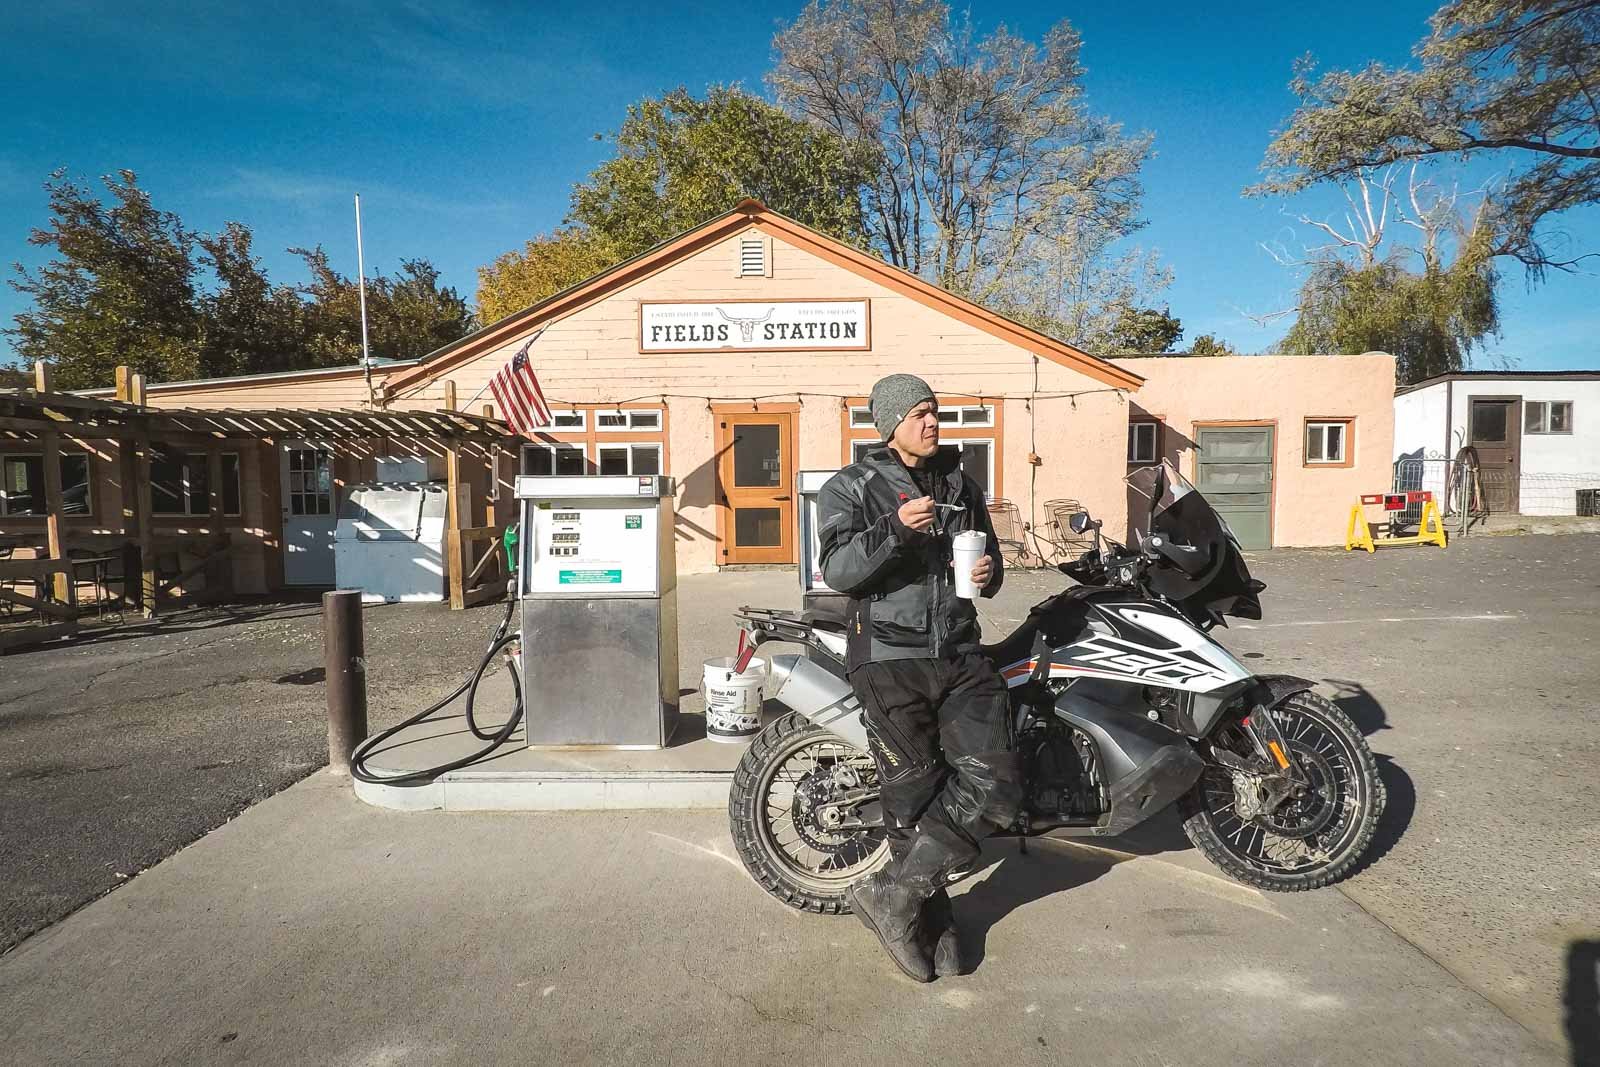 Garrett eating ice cream while leaning on the KTM 790 Adventure in front of fields station gas station